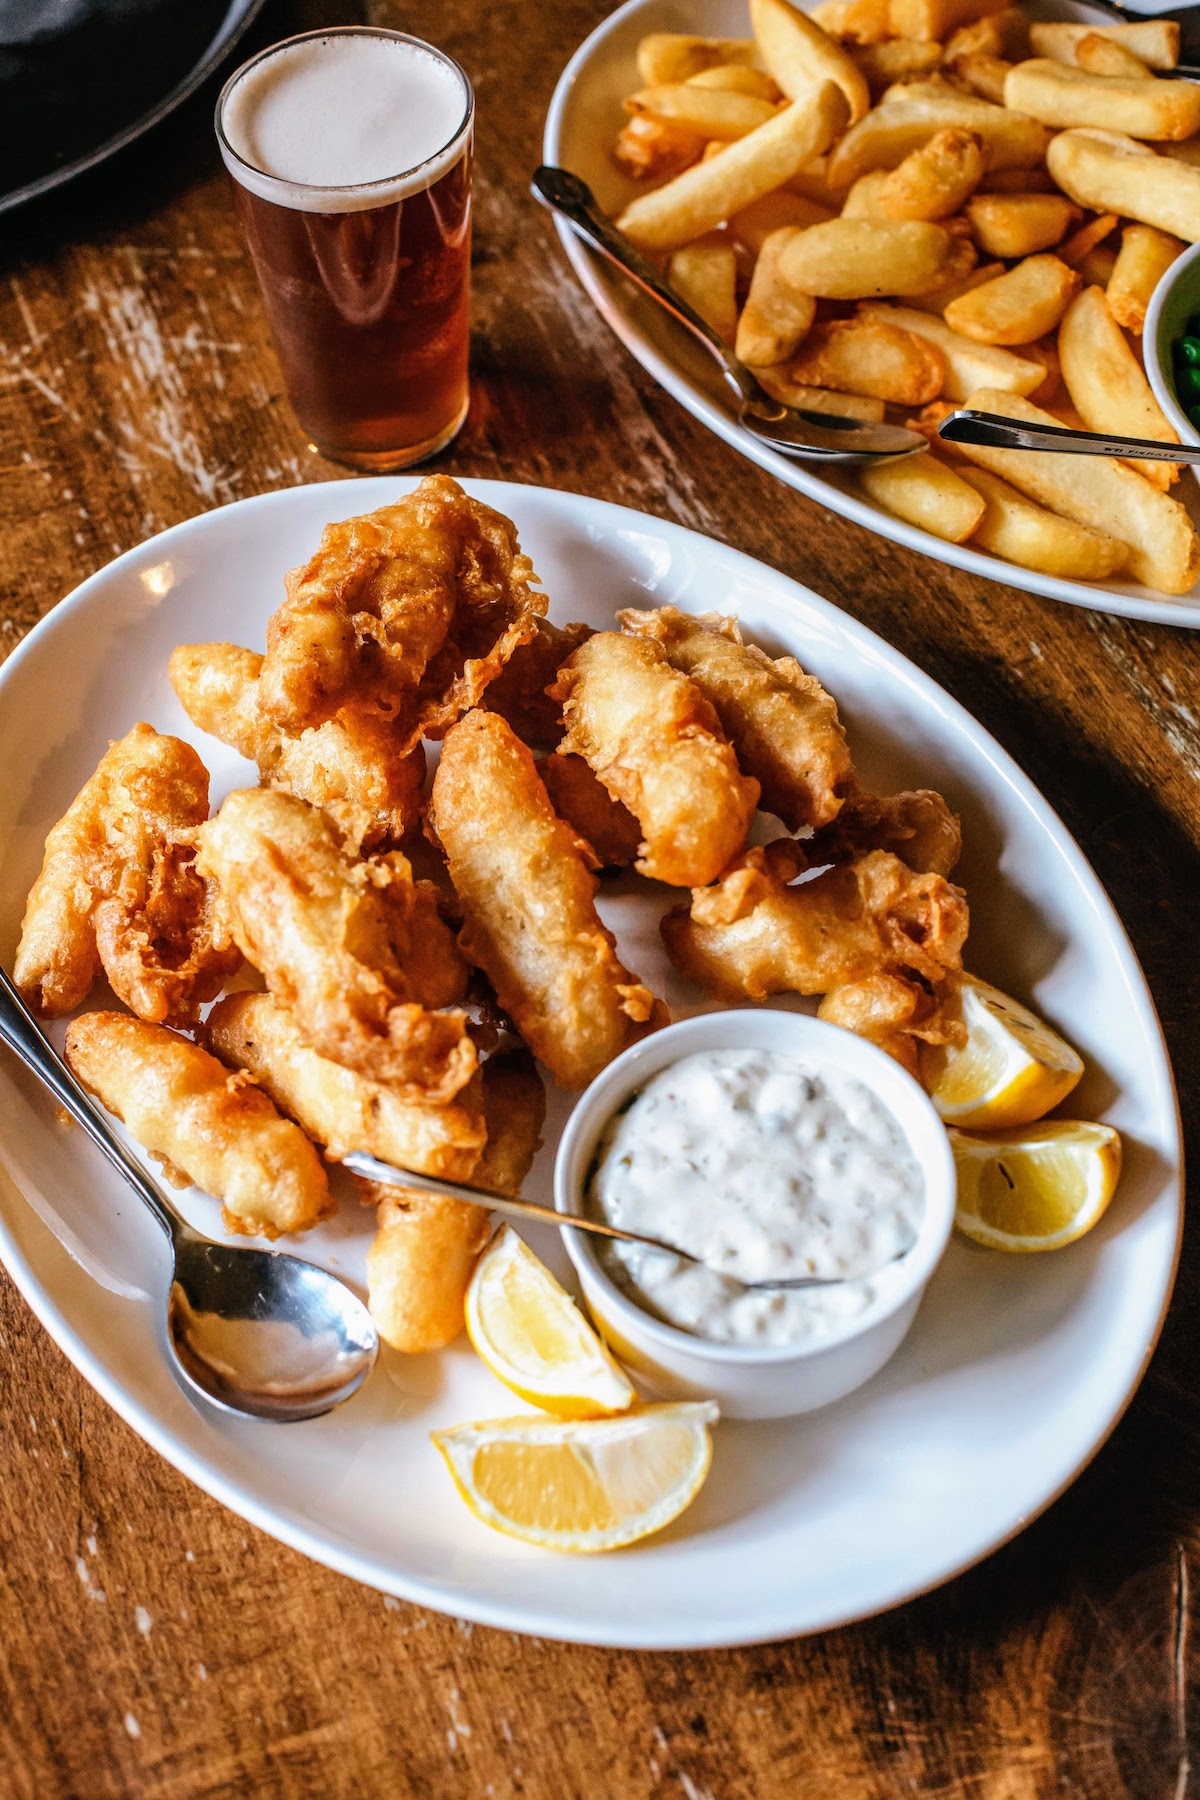 Fried fish pieces served on a white plate with tartar sauce and lemon wedges with a plate of french fries in the background.